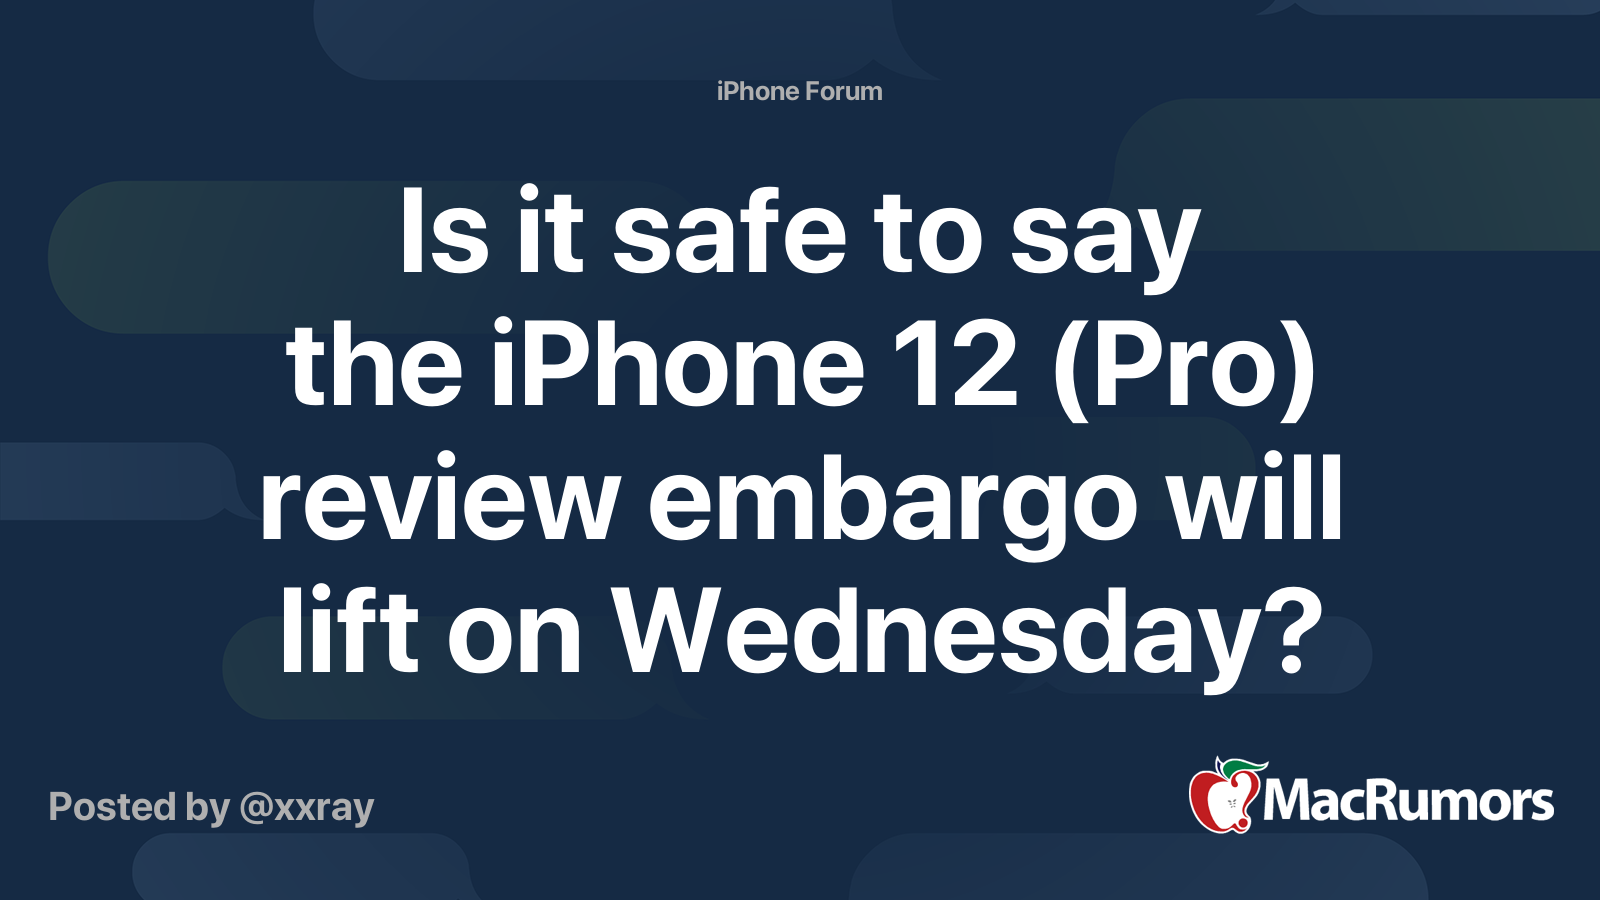 Is it safe to say the iPhone 12 (Pro) review embargo will lift on